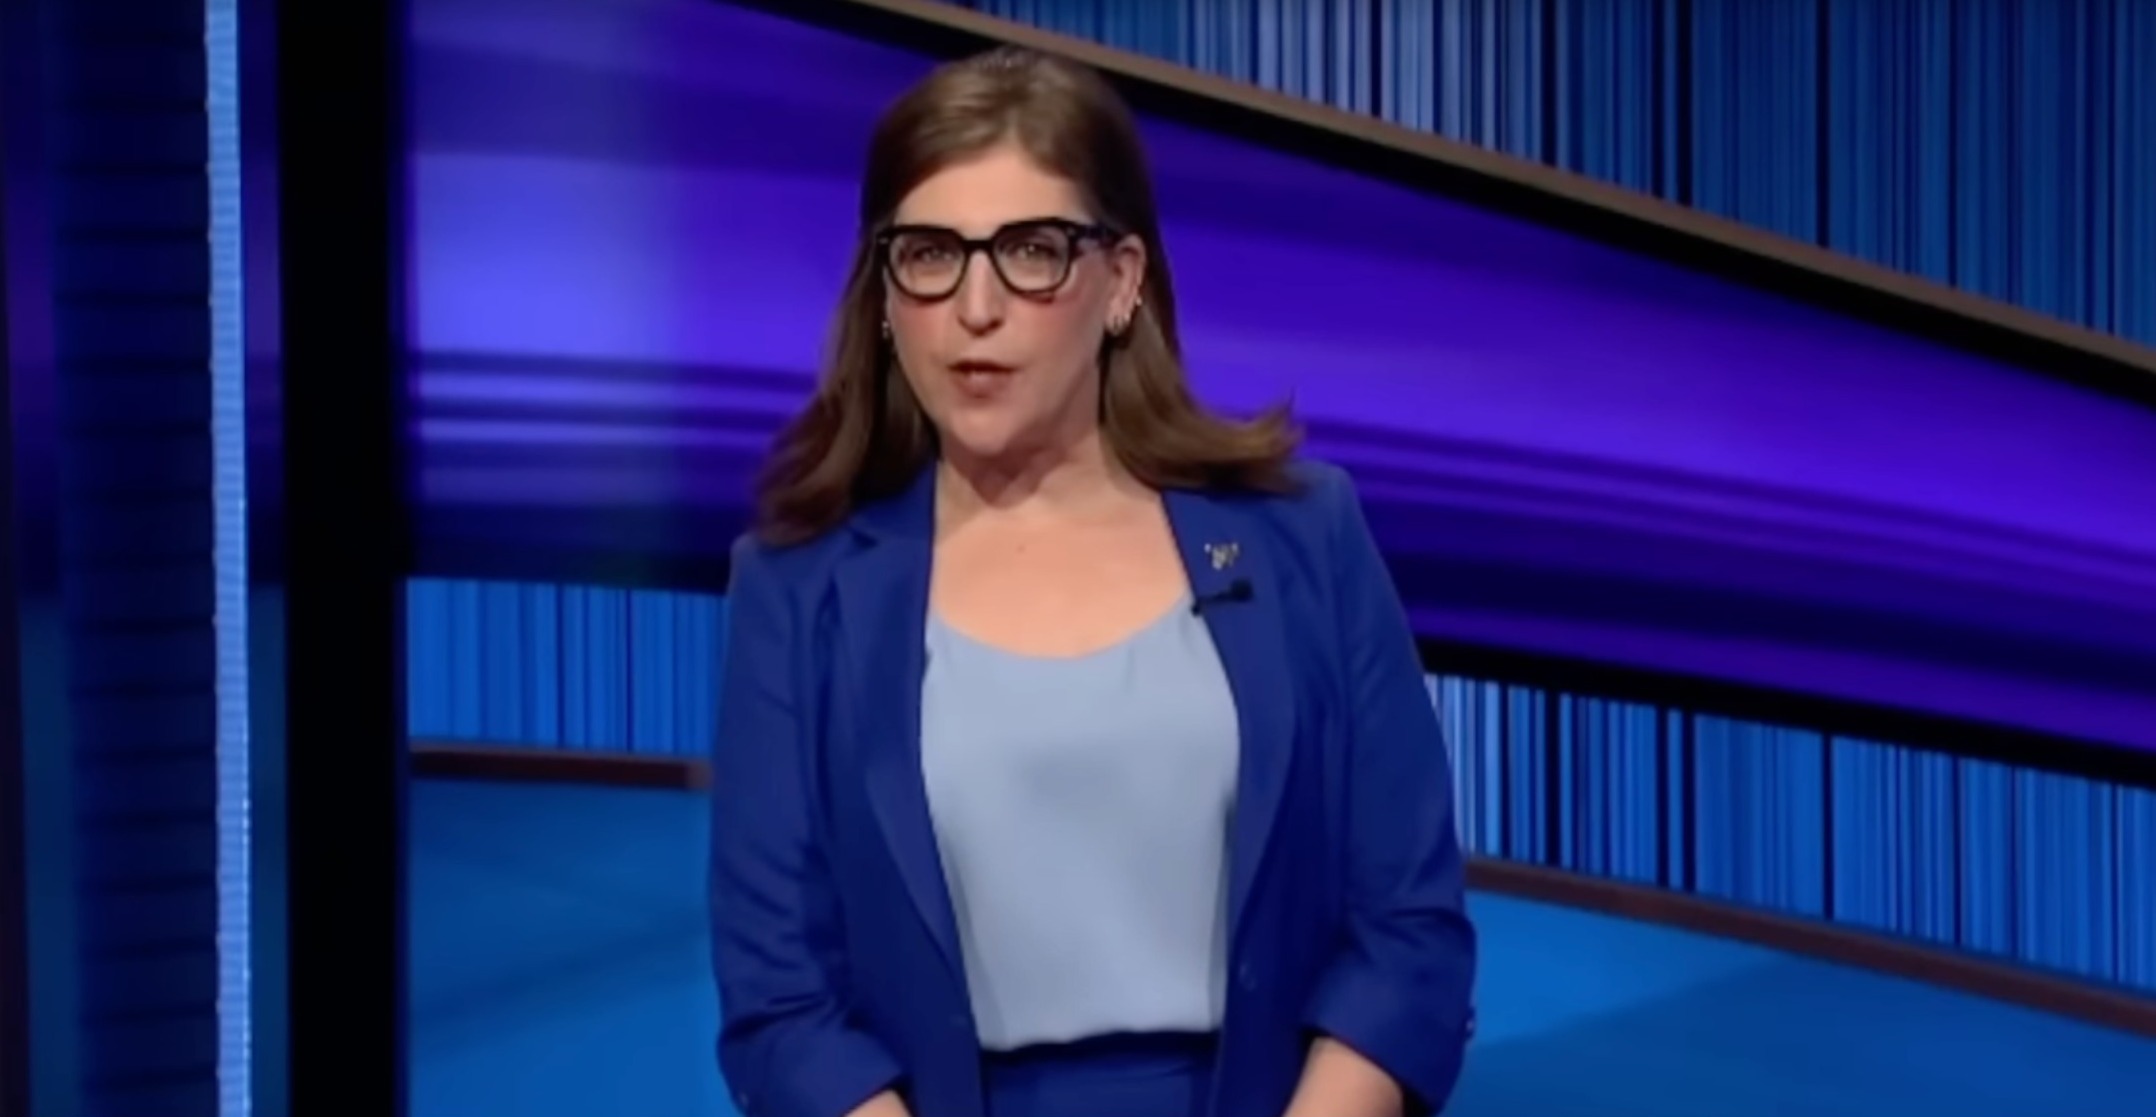 Fans were not thrilled to see Mayim on Jeopardy's Instagram account